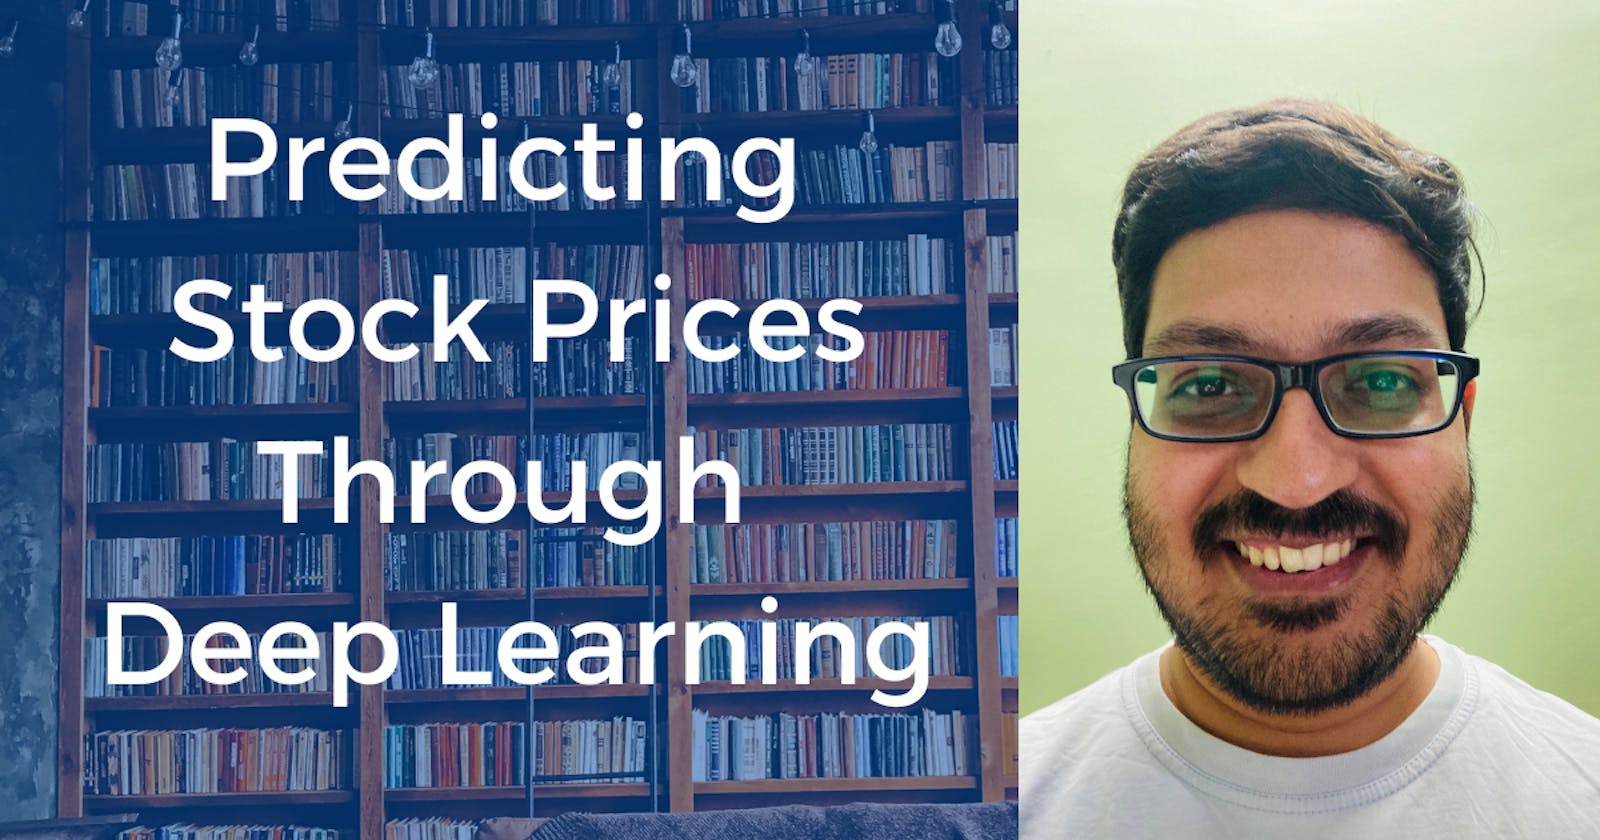 Predicting Stock Prices Through Deep Learning